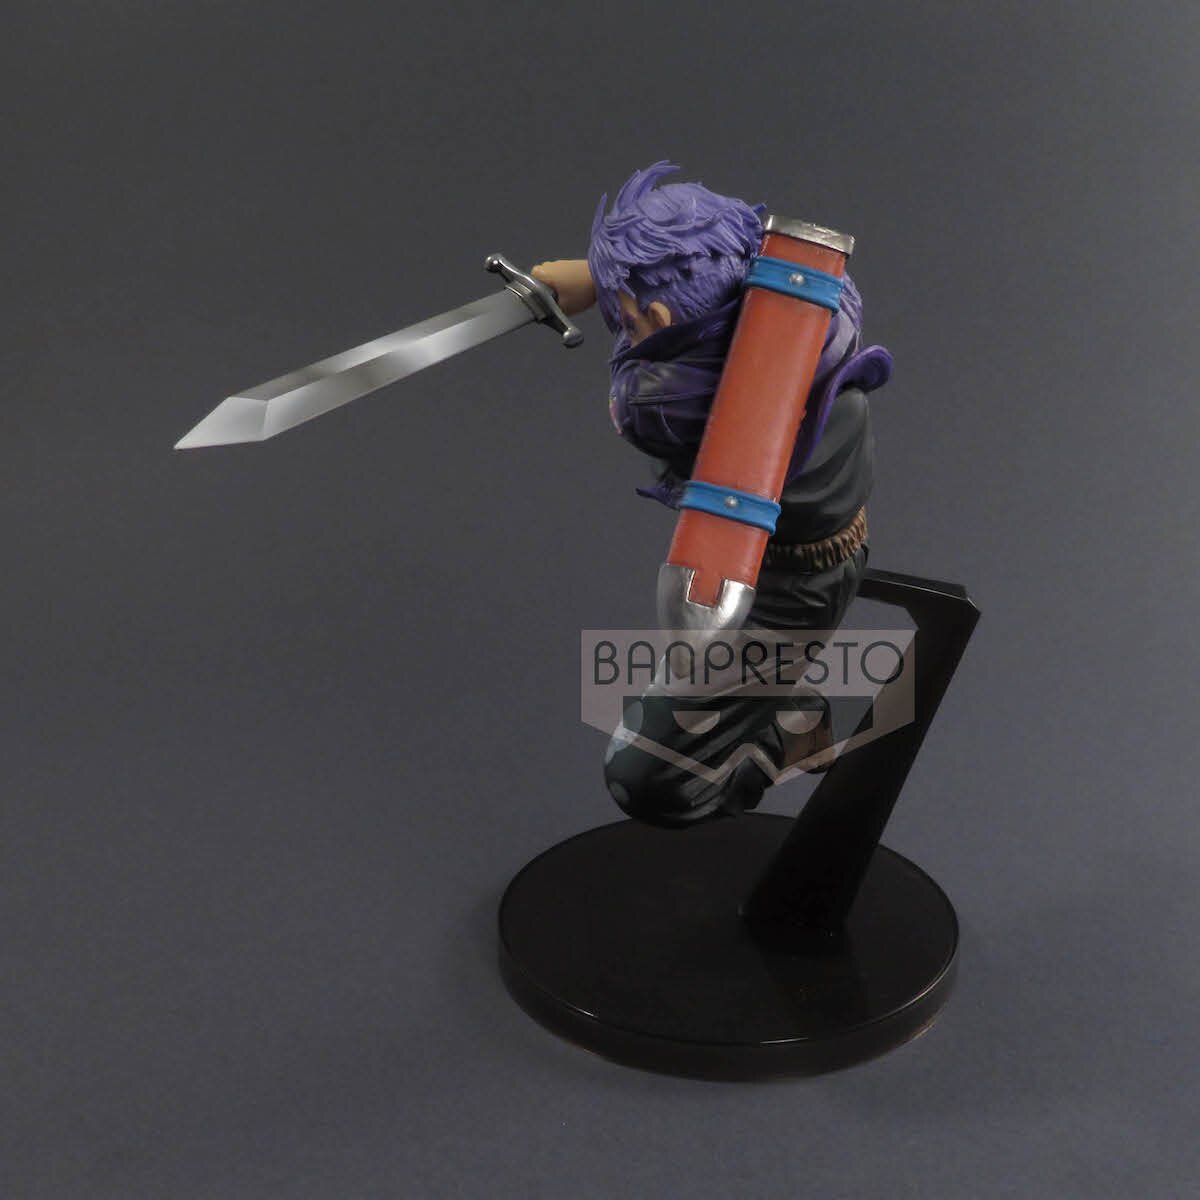 Dragon Ball Z SCultures Trunks: Shining Color Ver.